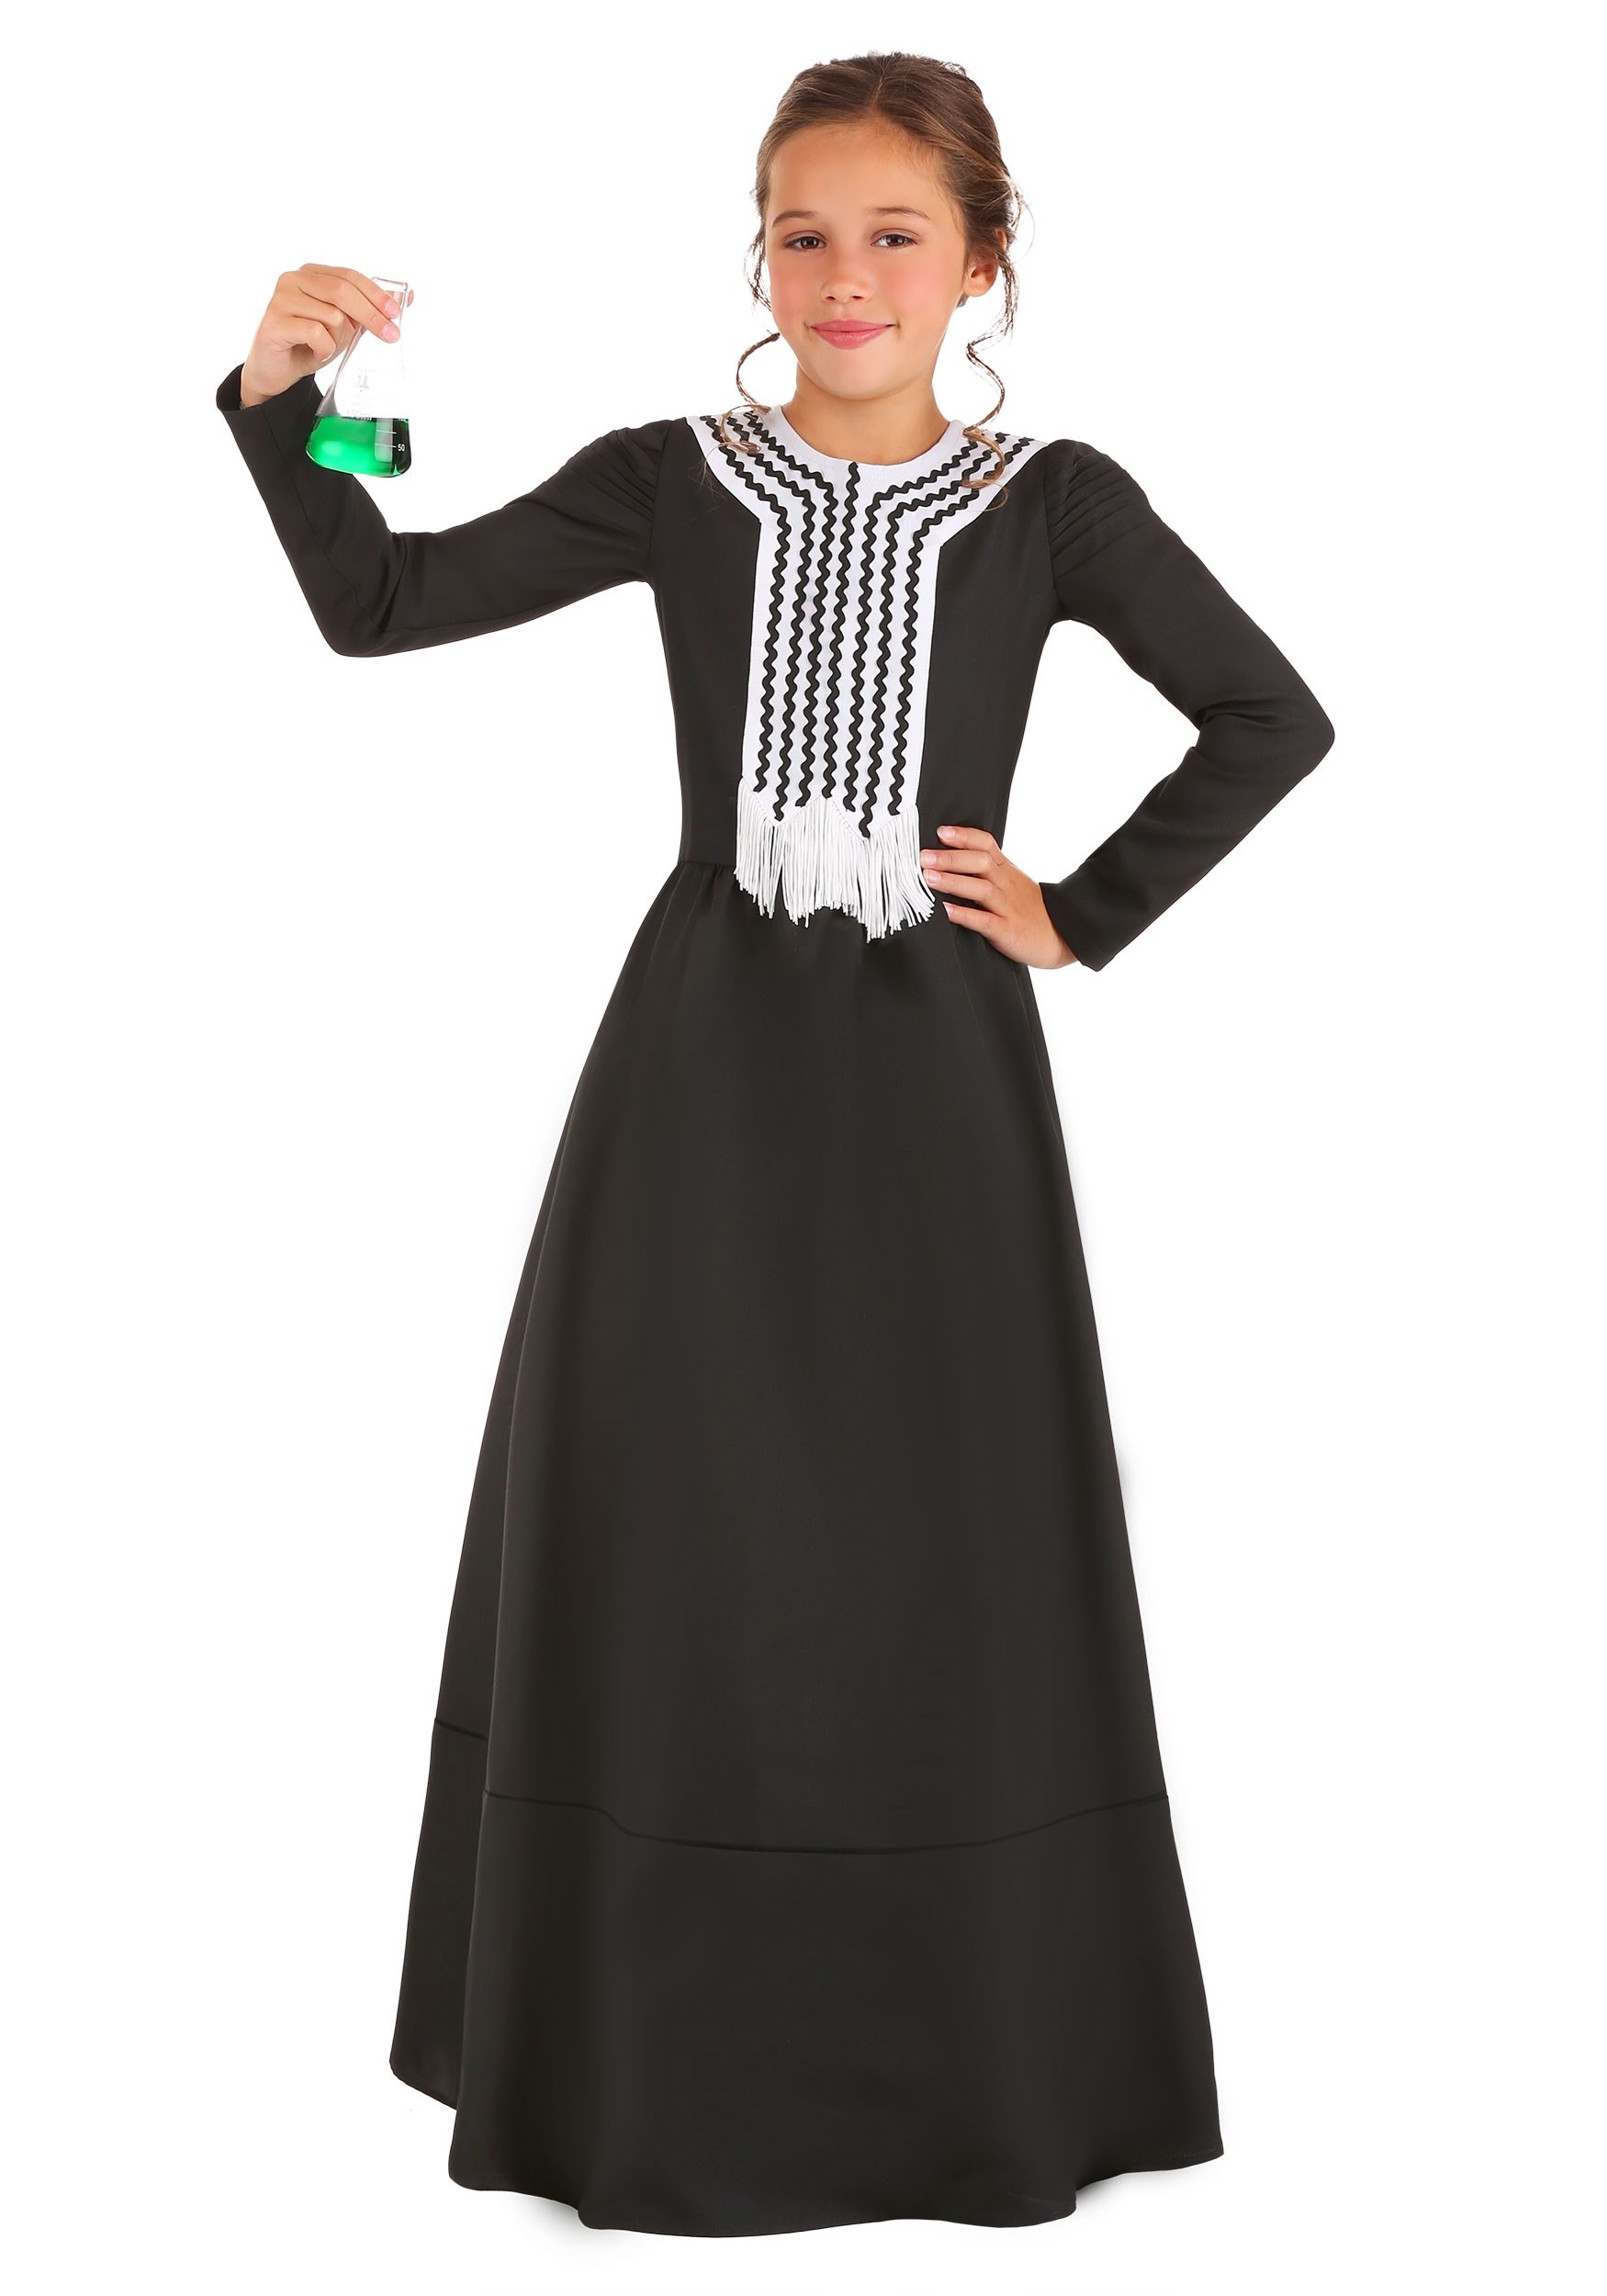 Girl’s Marie Curie Costume